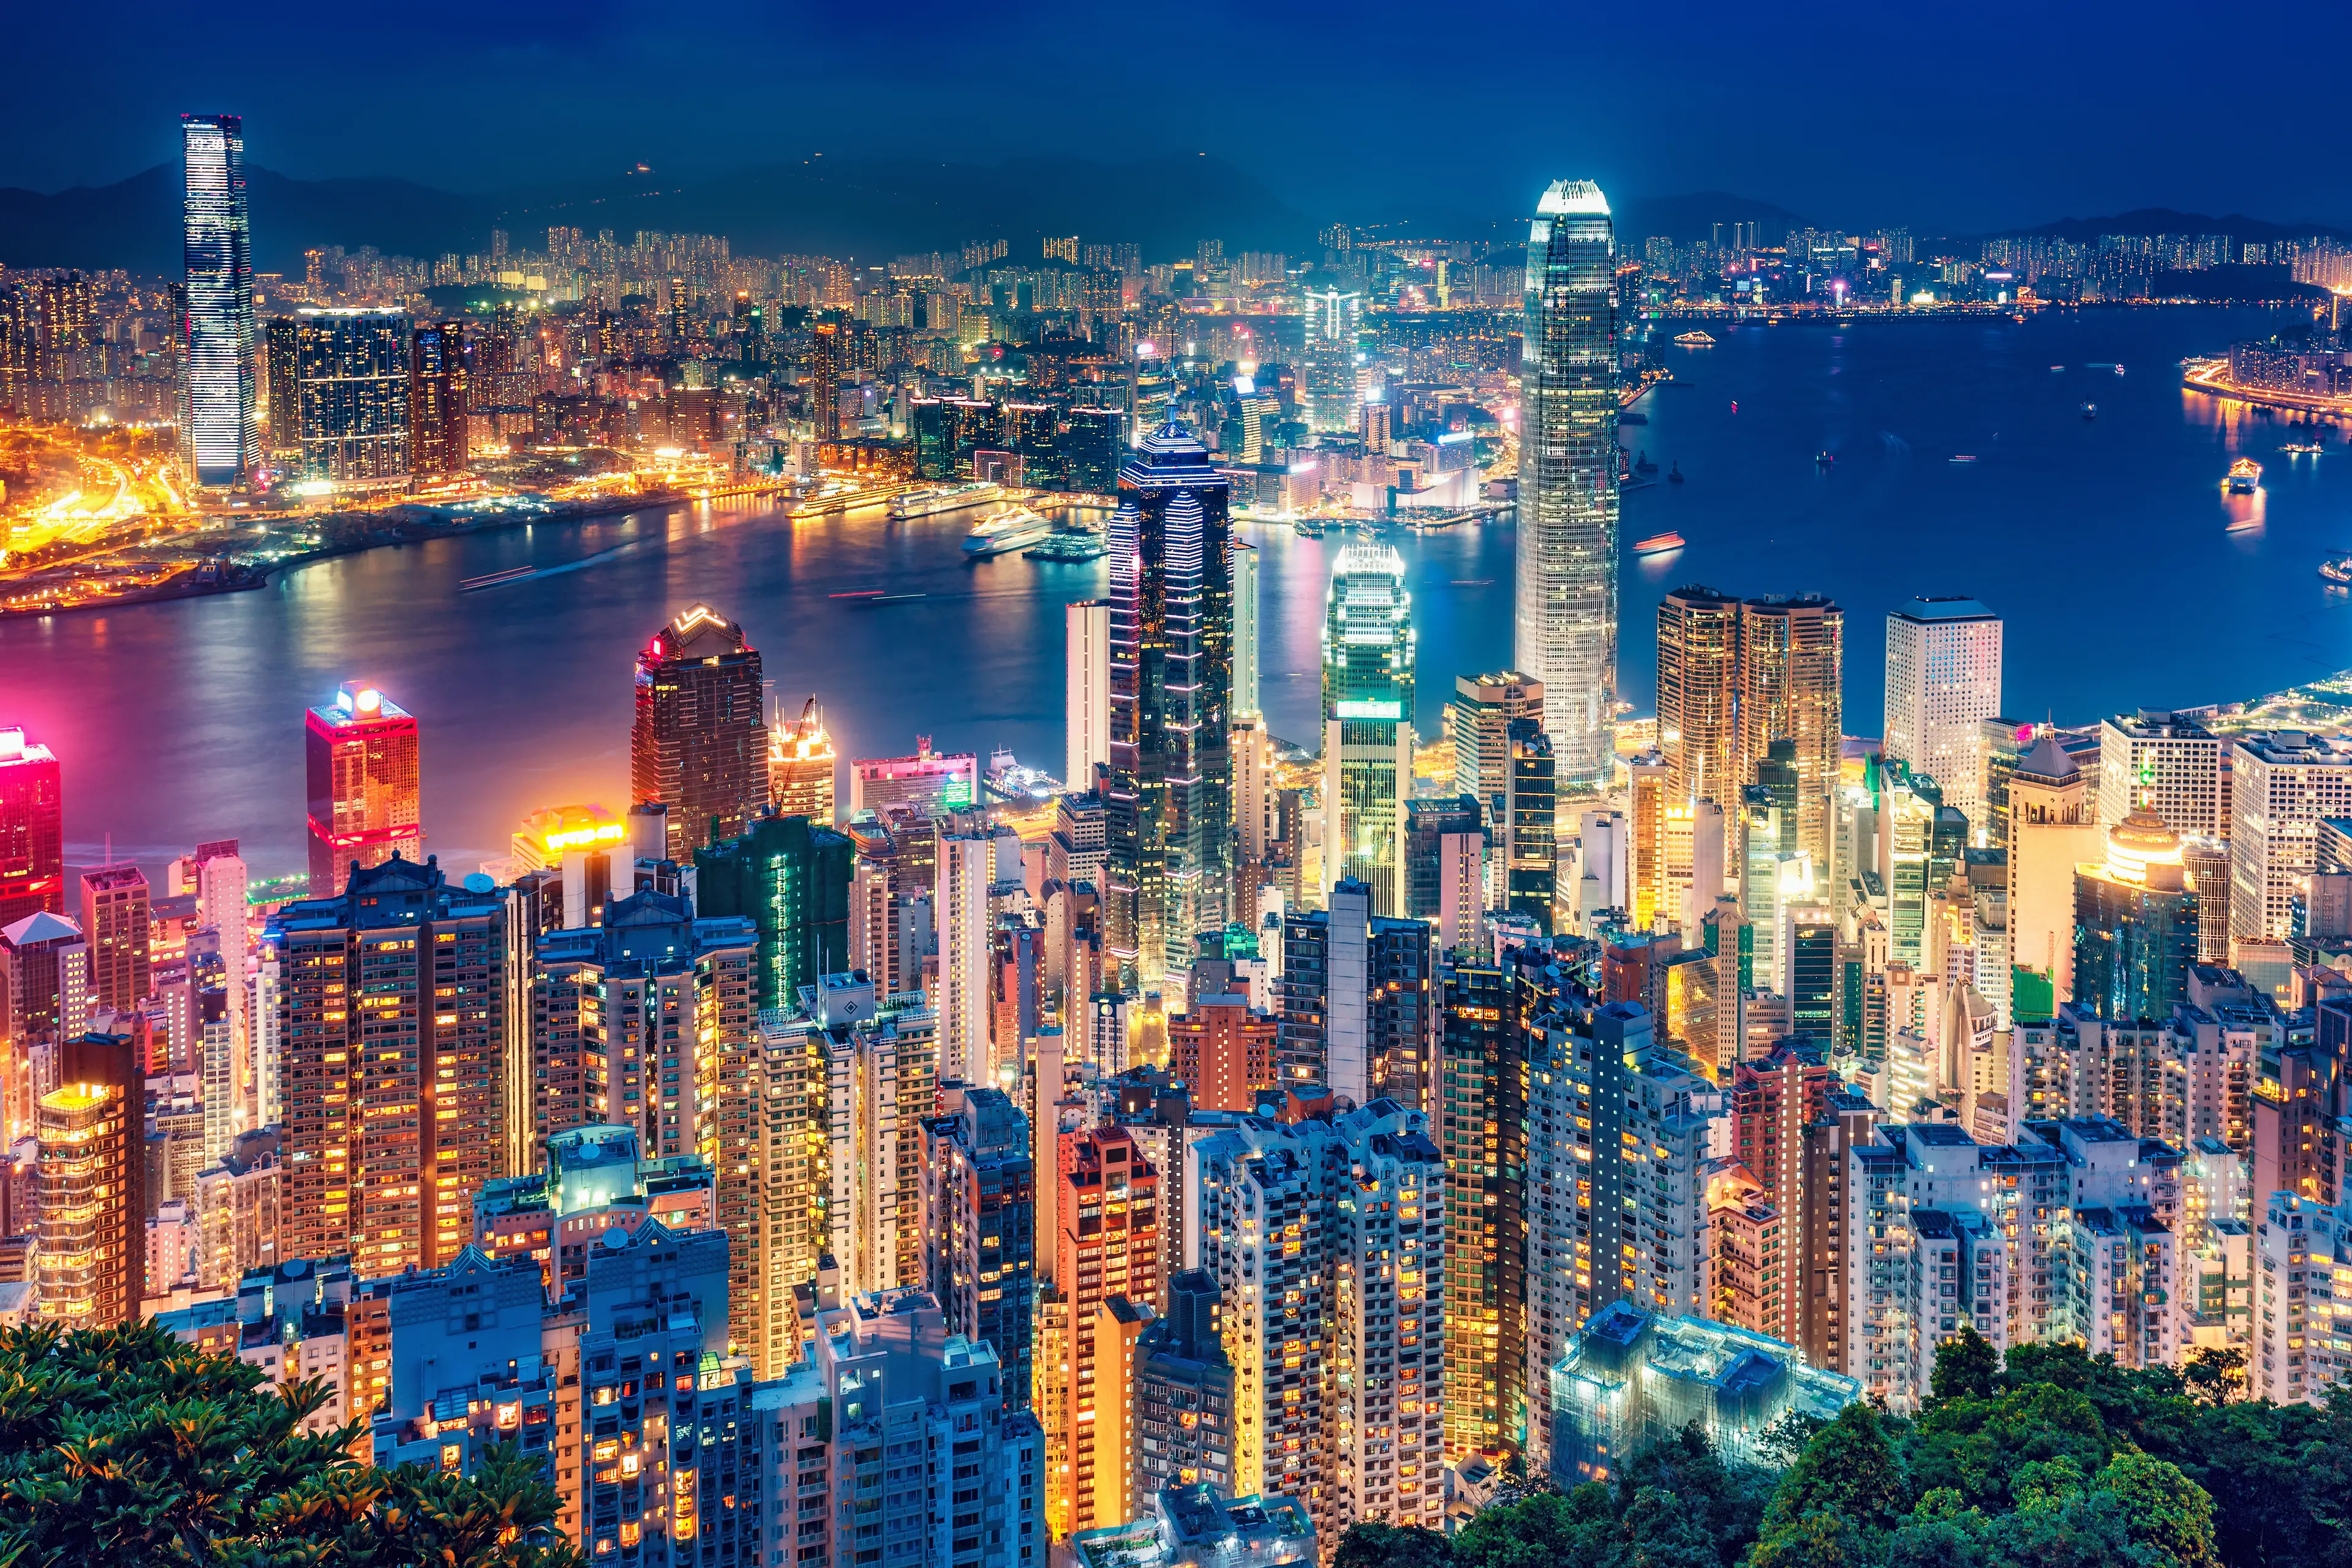 4-Day Hong Kong Adventure: Shopping, Fine Dining & Nightlife with Friends